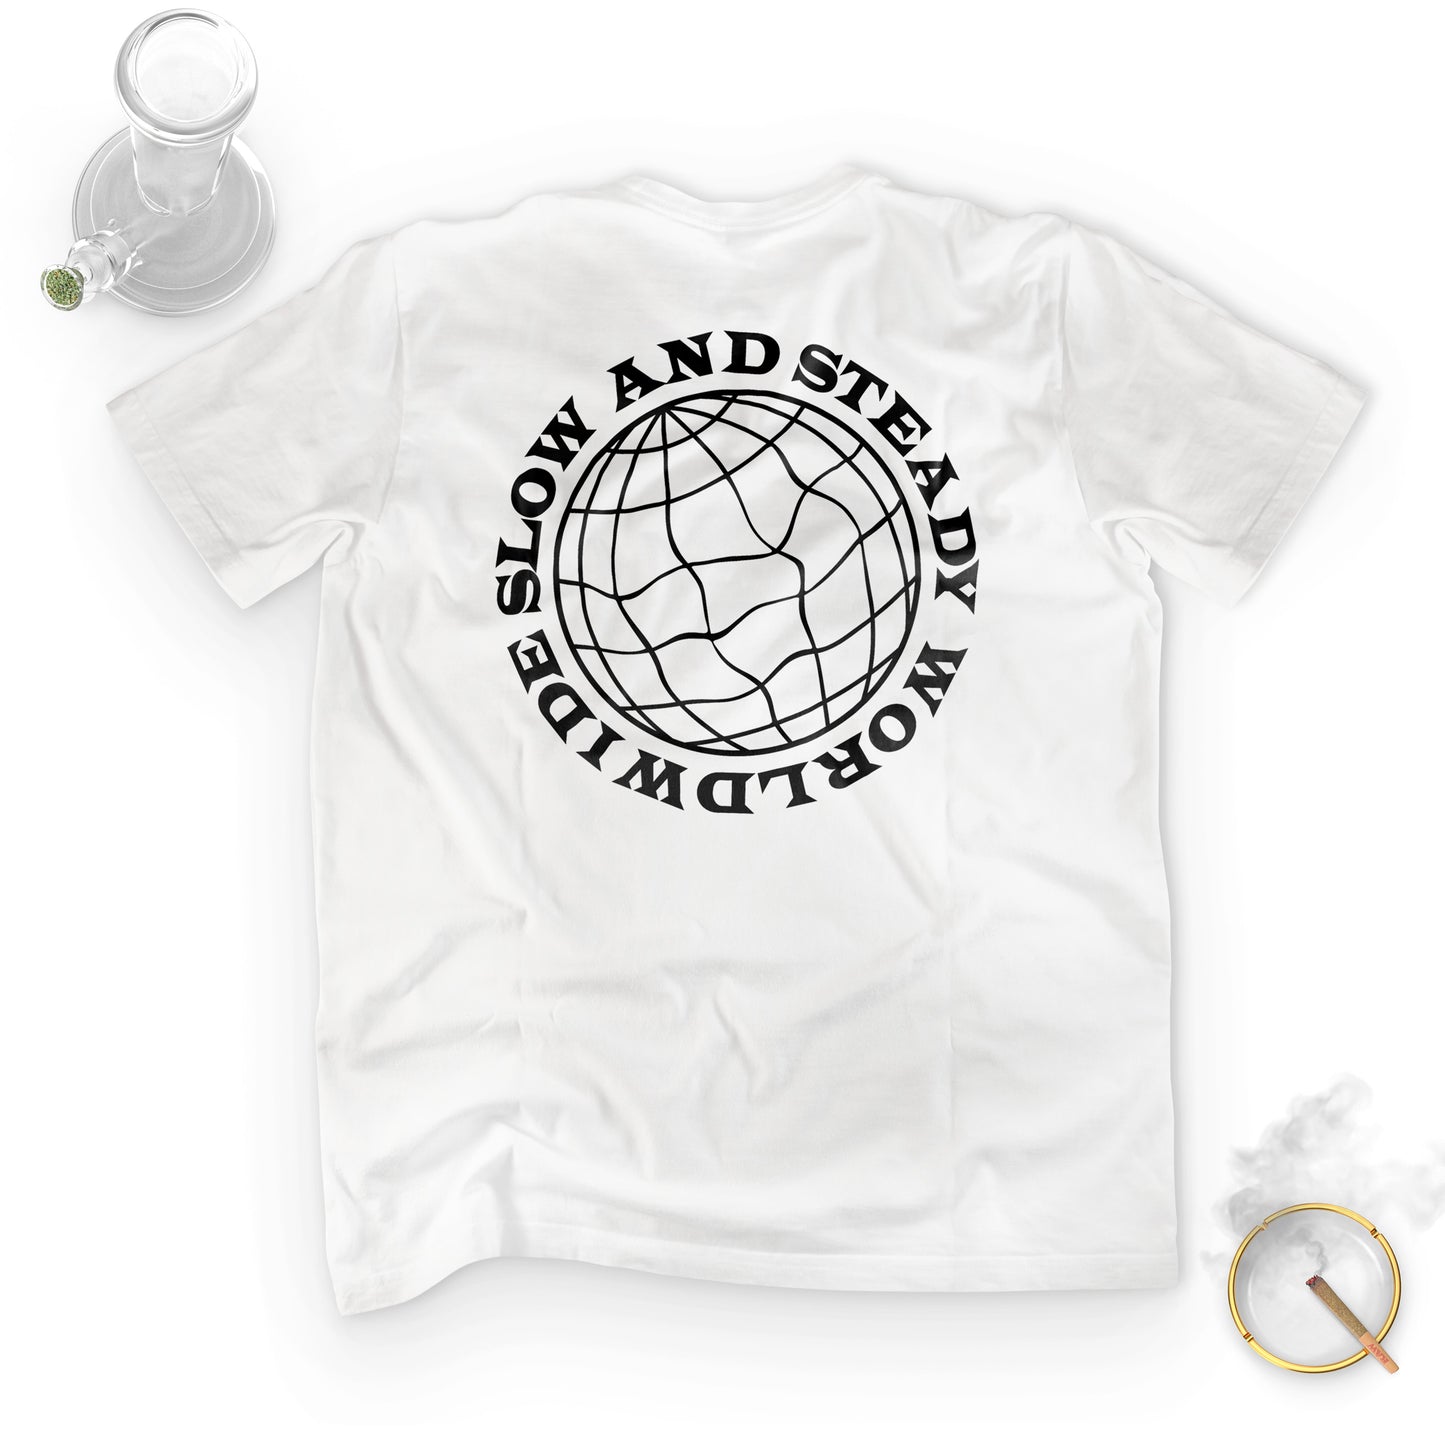 Slow And Steady WHITE FIX - Heavyweight Unisex Tee - Beefy Cotton Tee